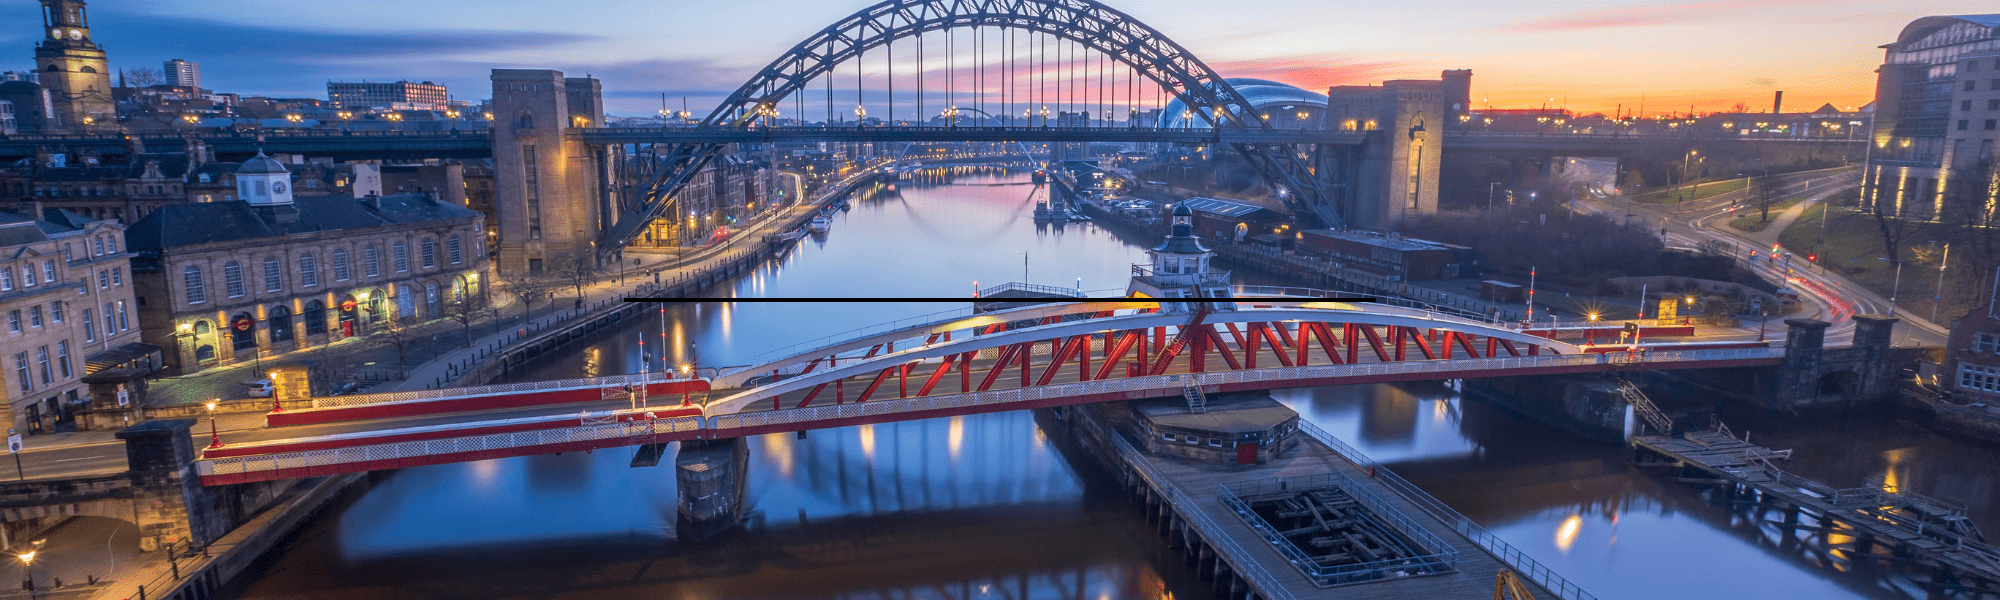 search for care jobs in Newcastle-upon-Tyne